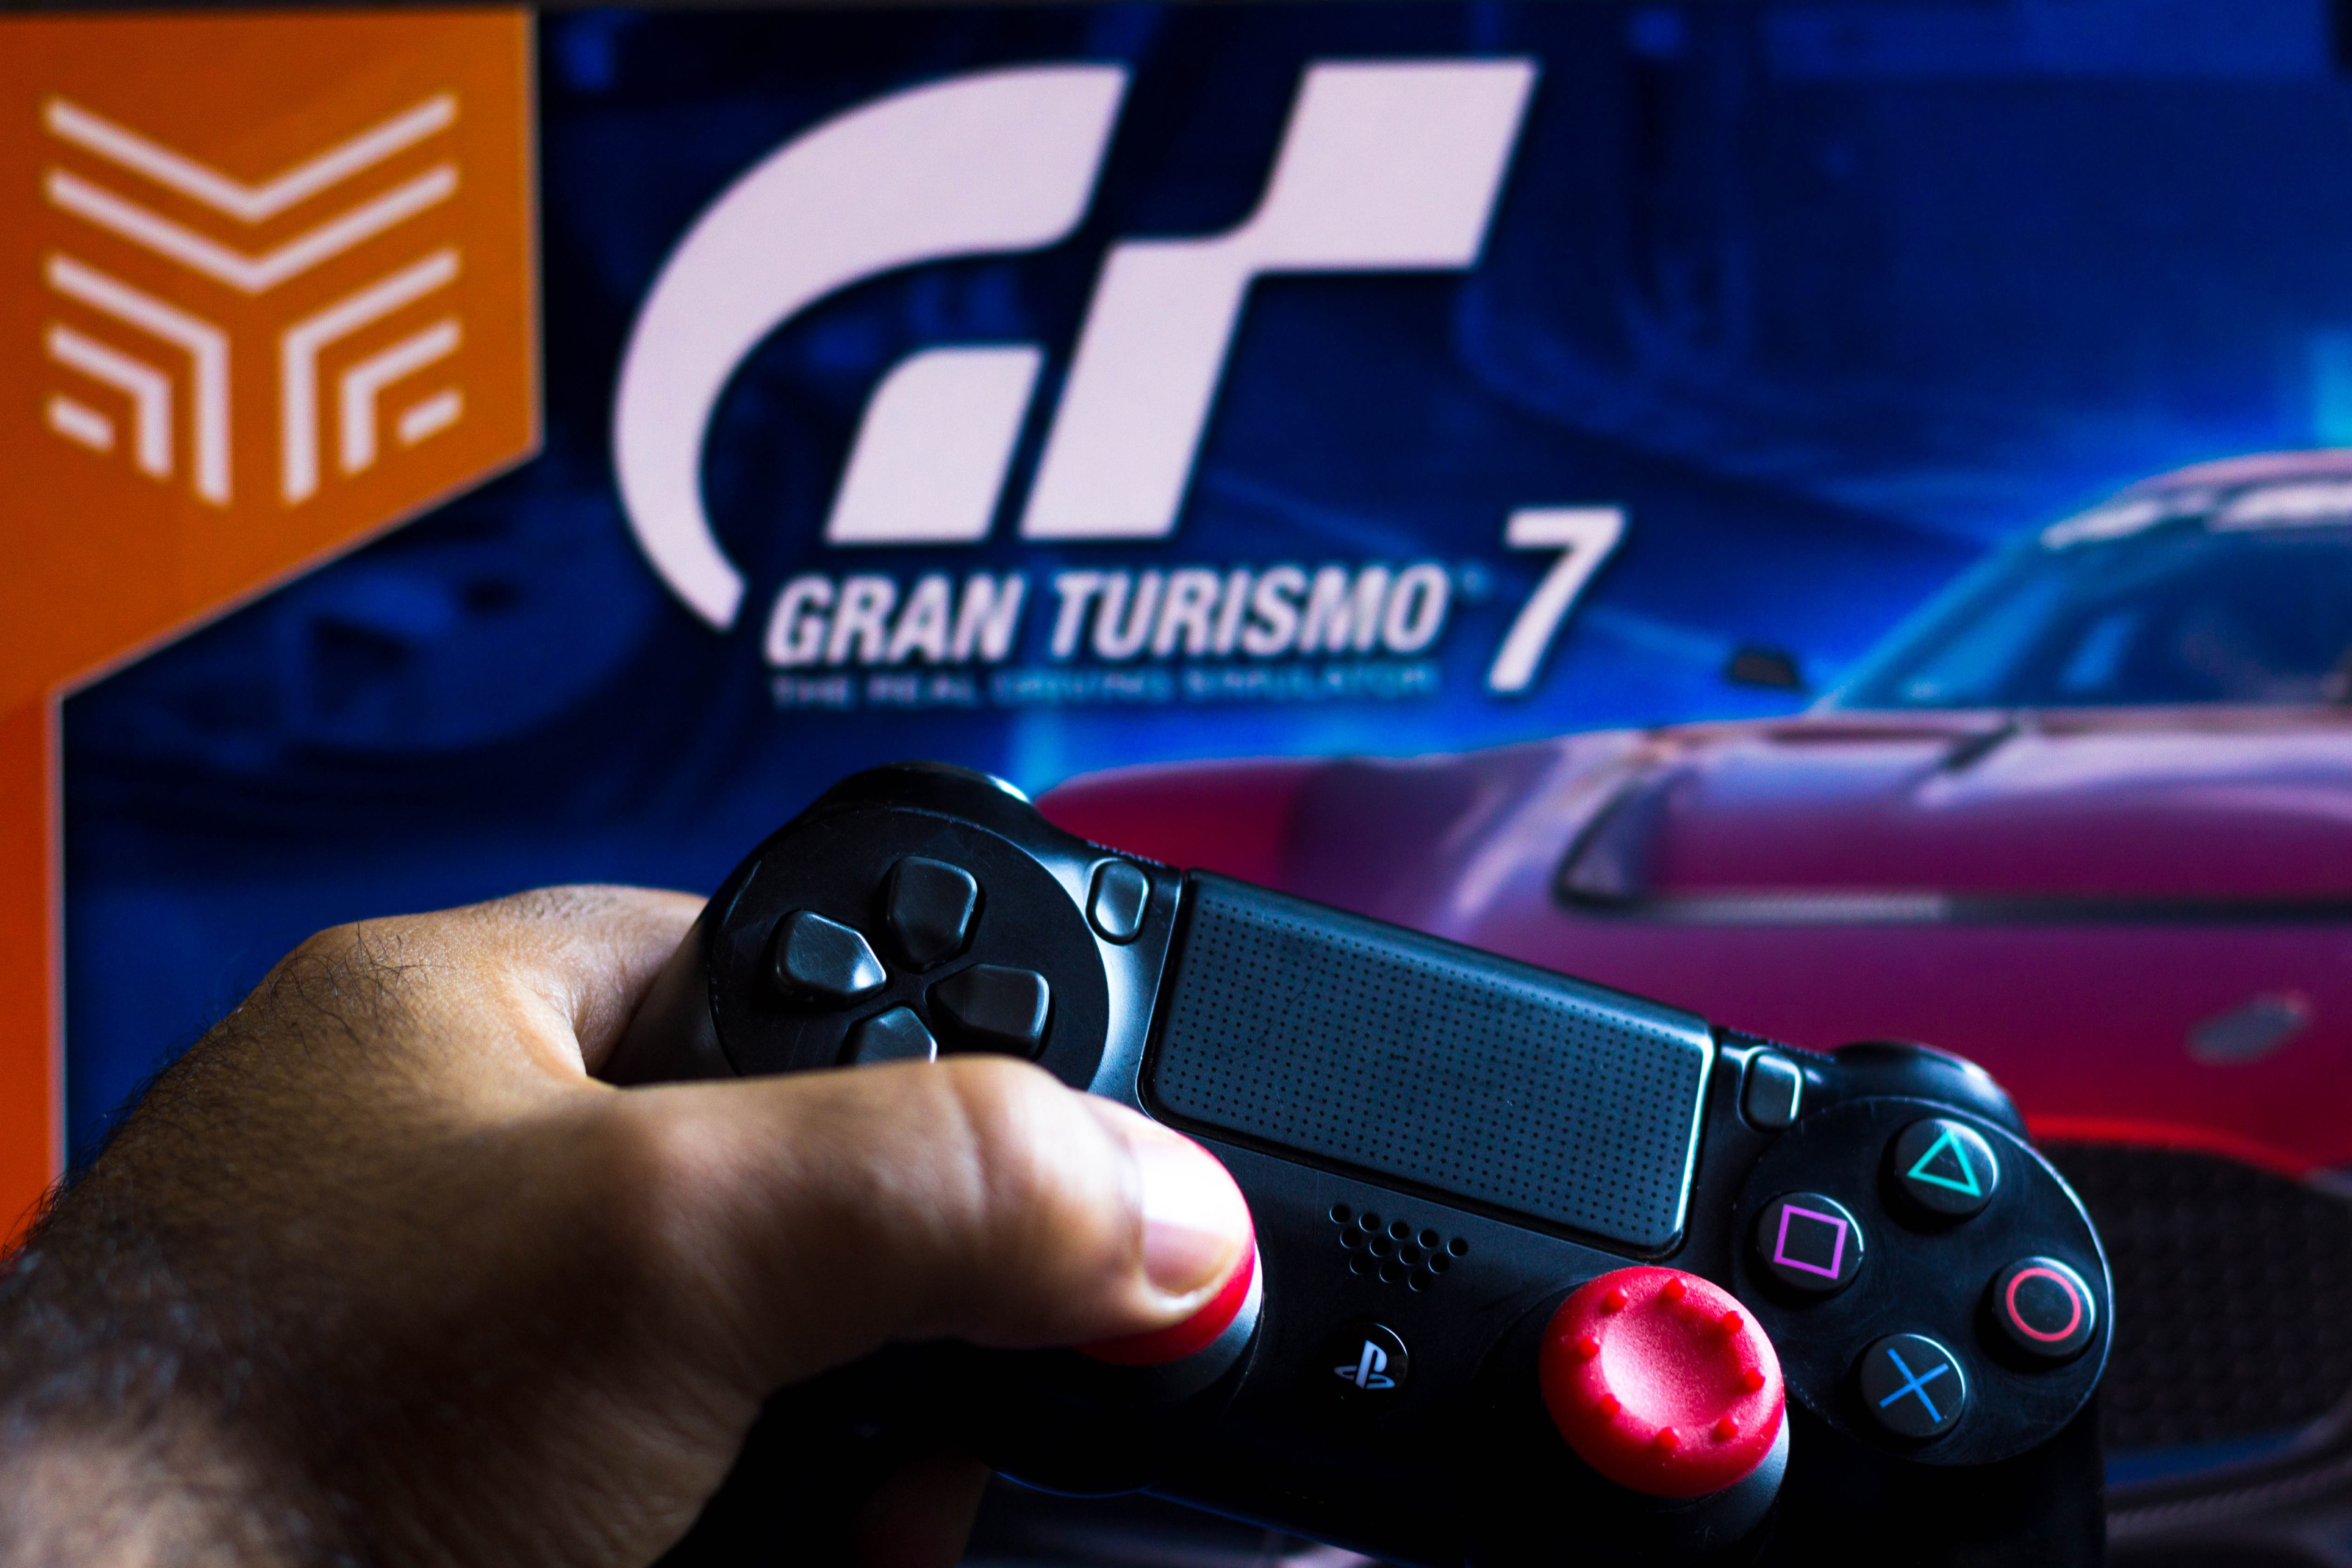 💫Pre order✨ PS5 Exclusive Gran Turismo 7 25th Anniversary Edition 💥Get an  Exclusive Gt7 key chain free 💥 👉Available Now at our…